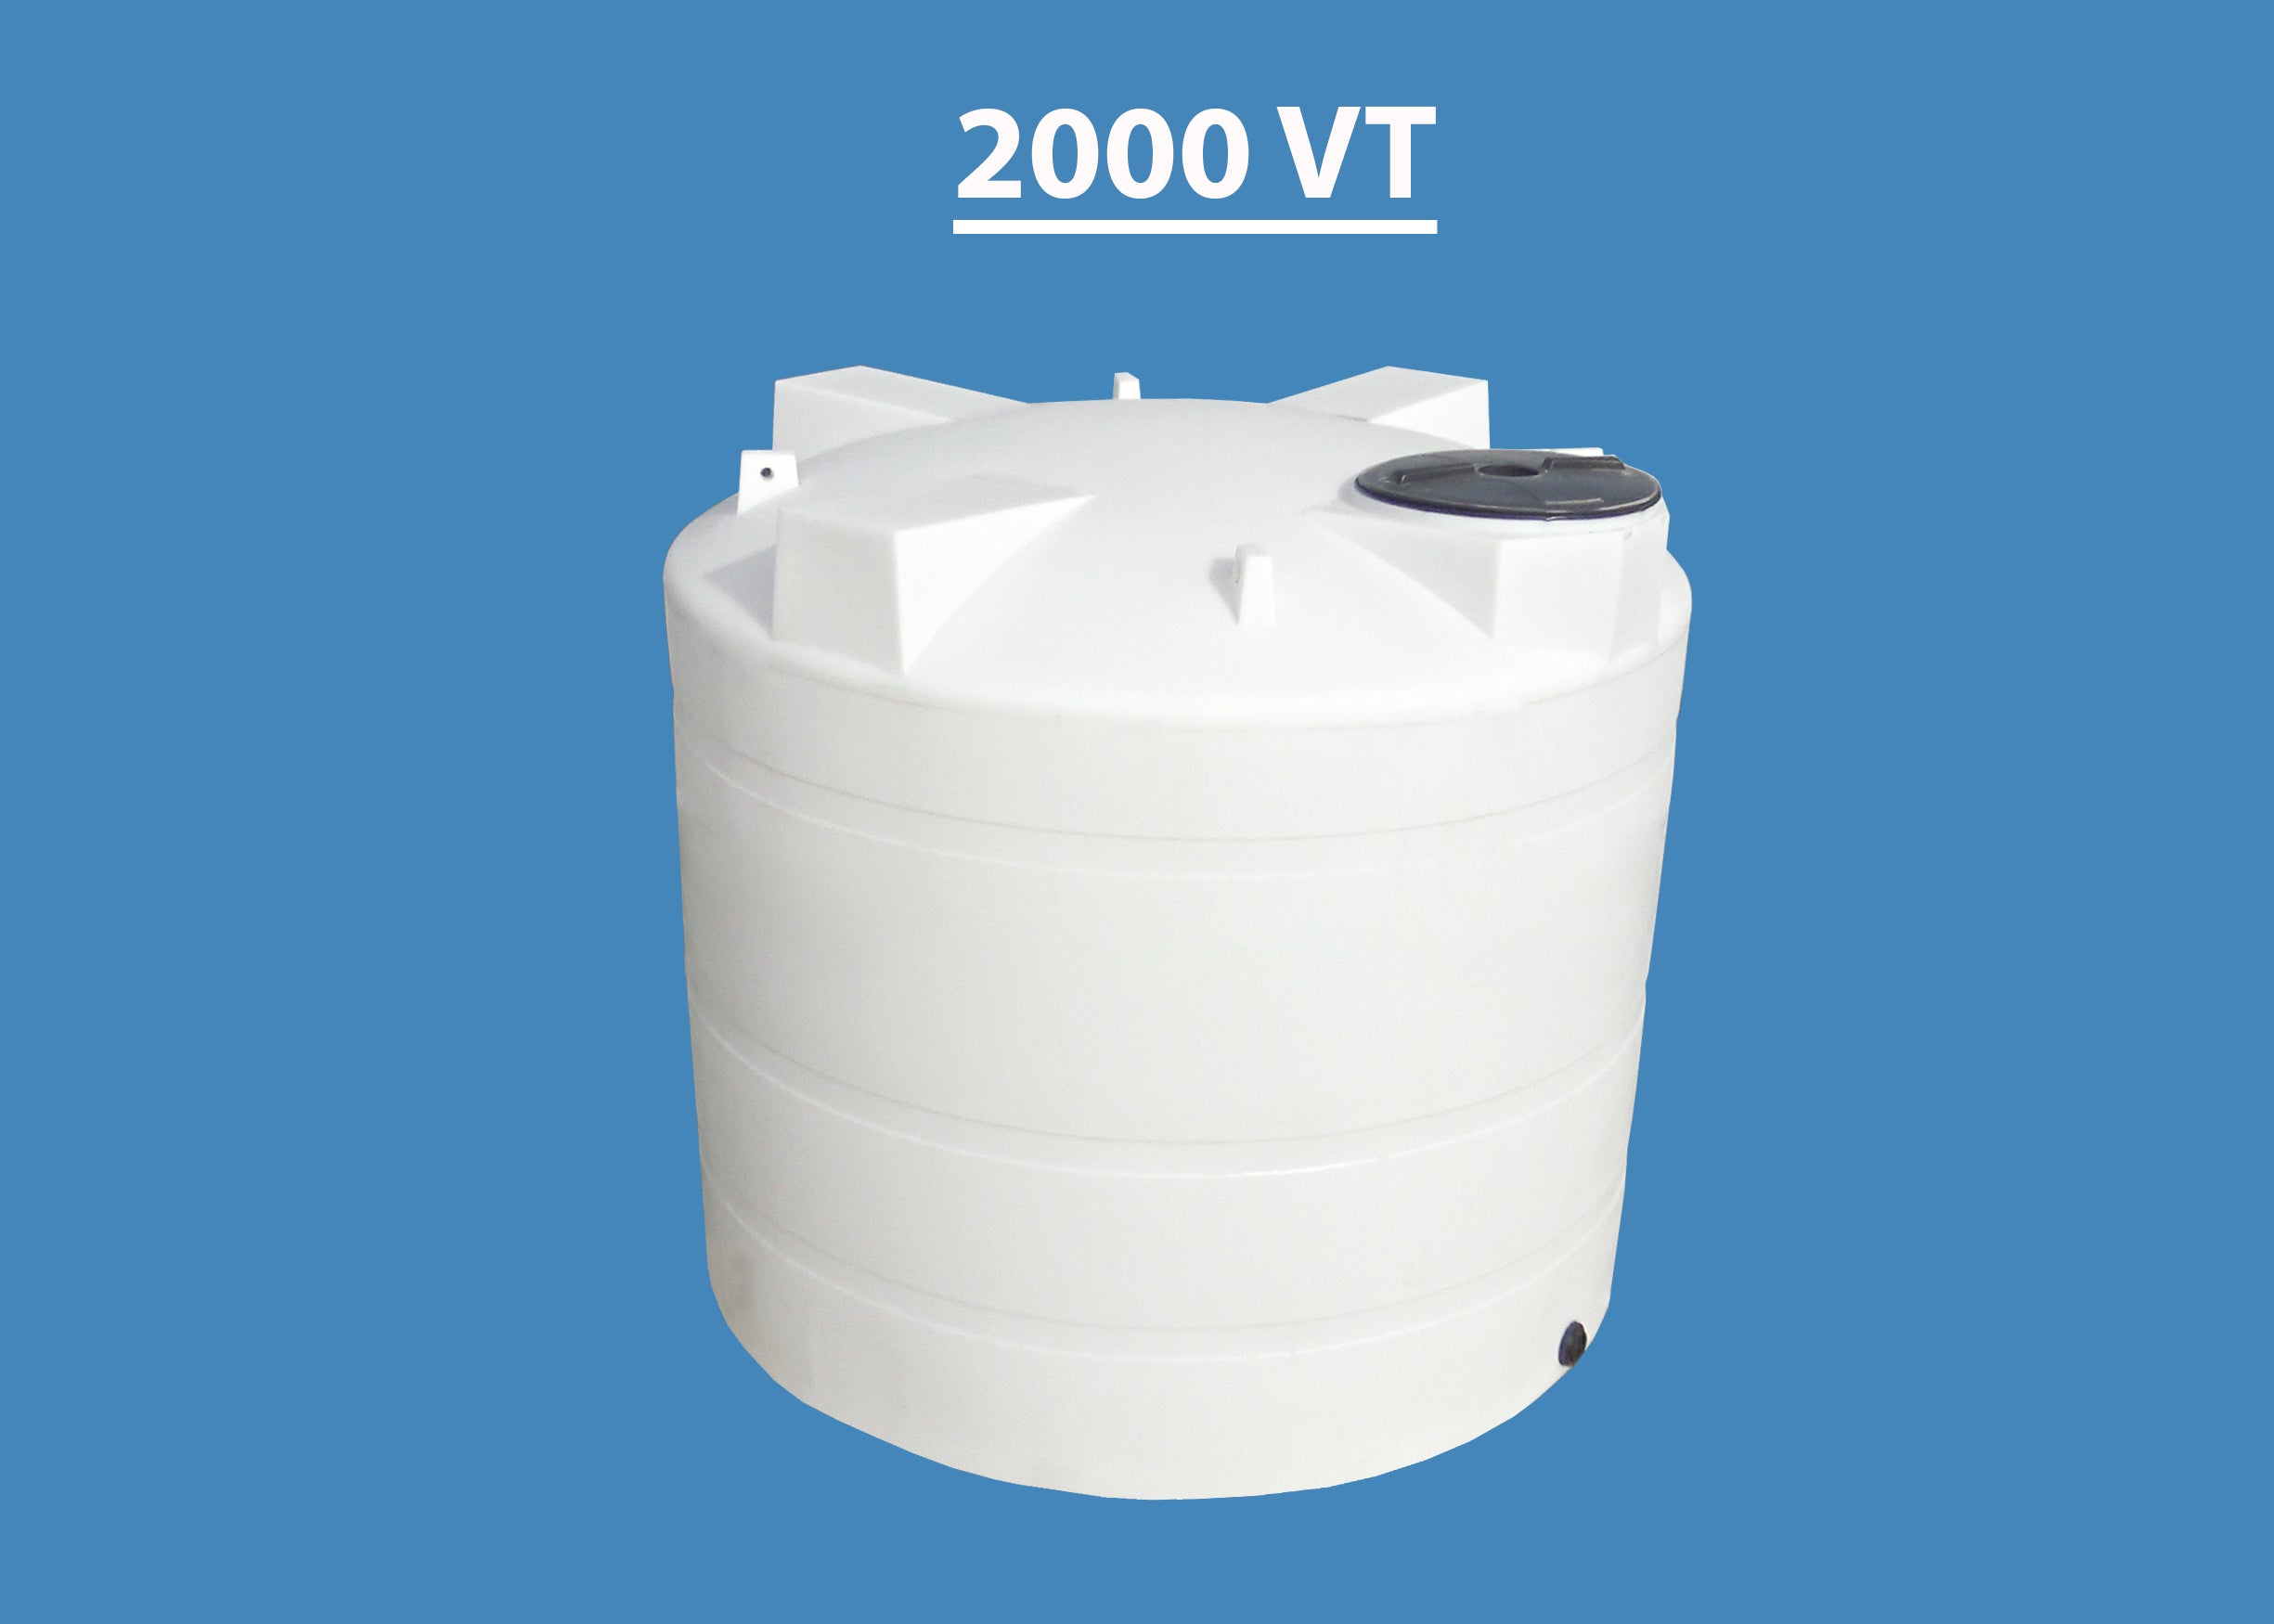 2000 Gallon Vertical Tank | All About Tanks